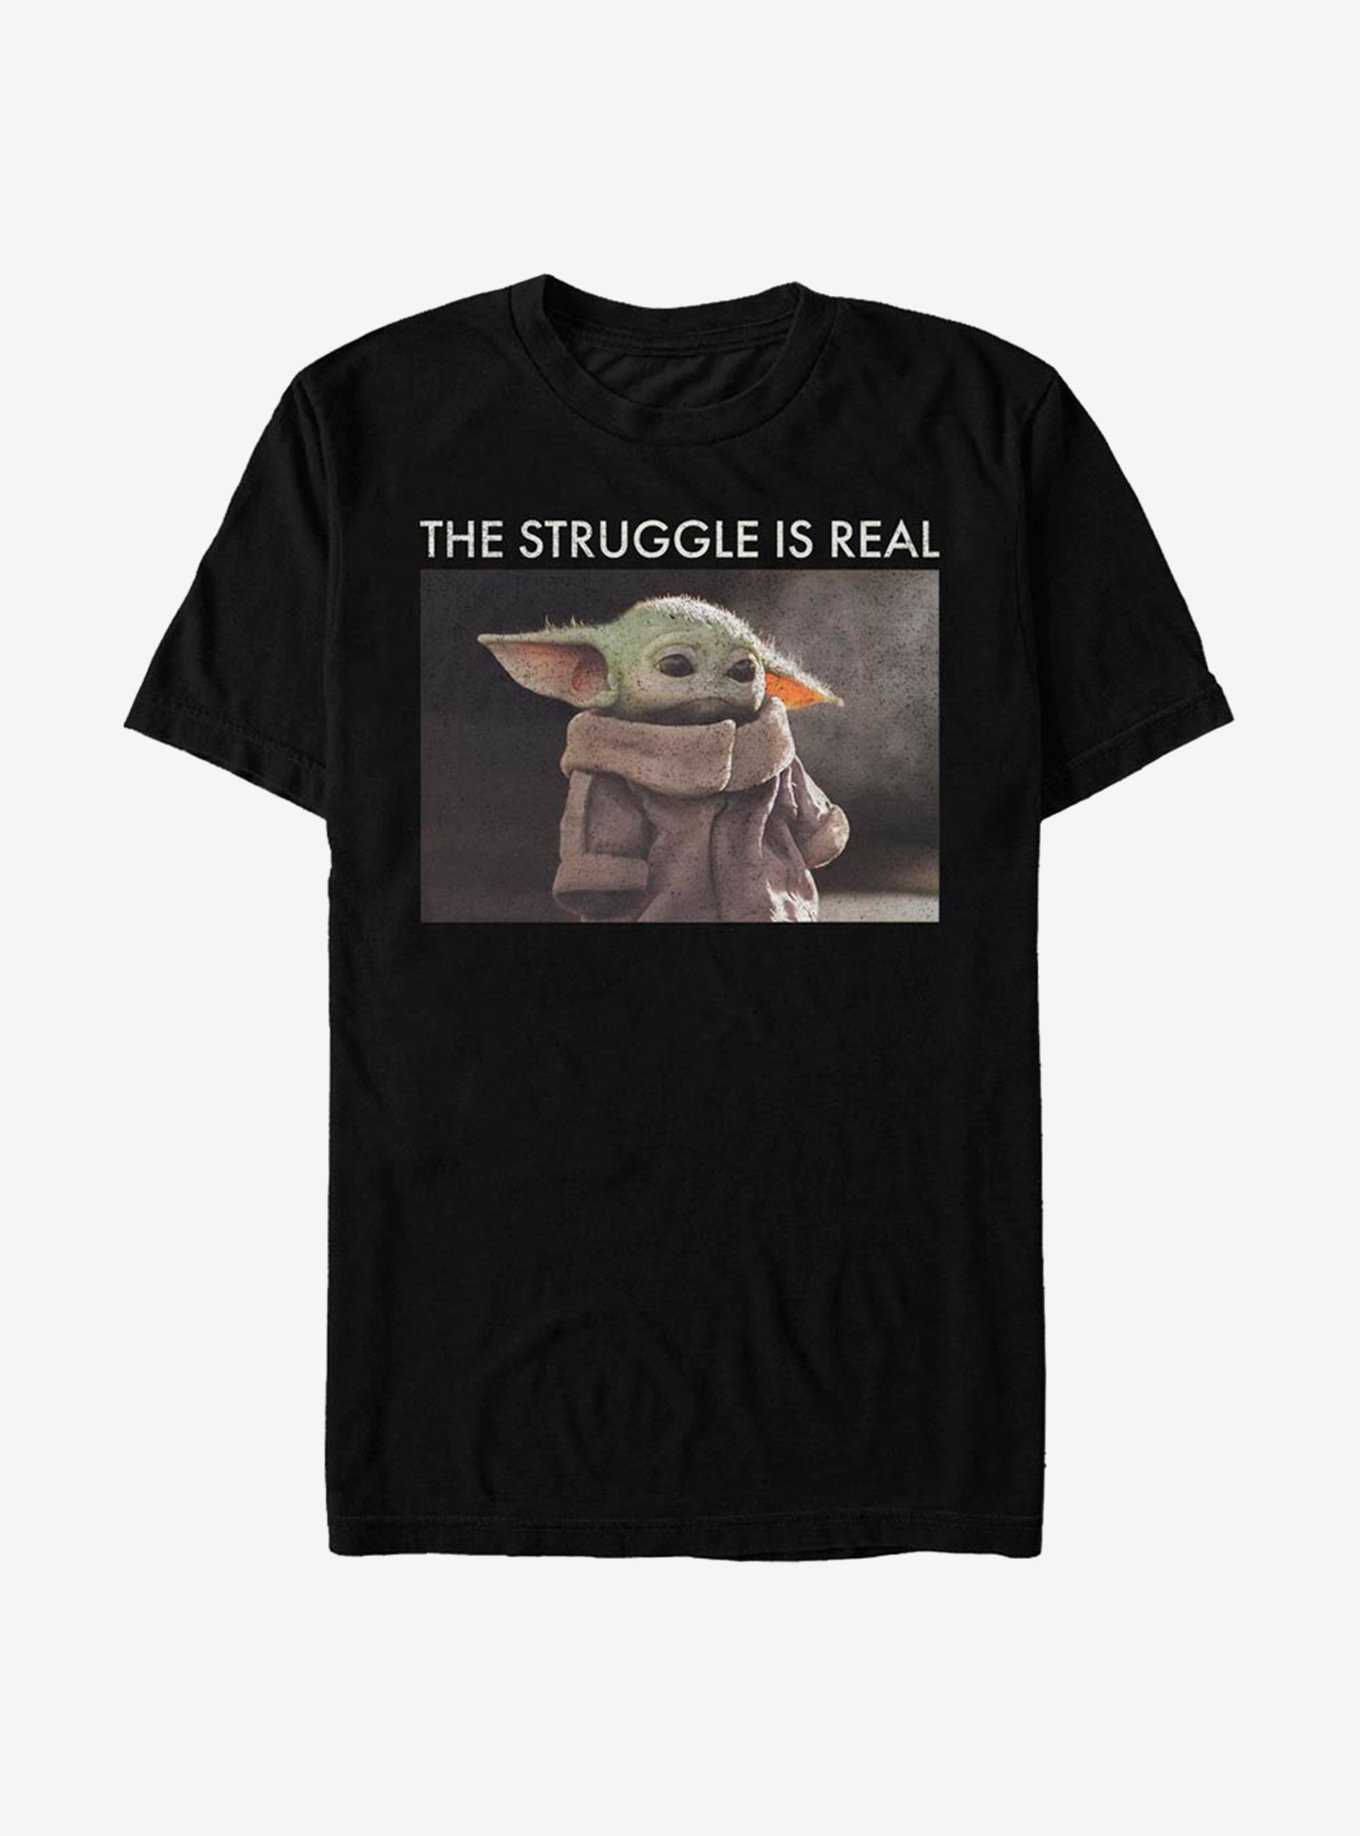 Star Wars The Mandalorian The Child Struggle Is Real T-Shirt, , hi-res